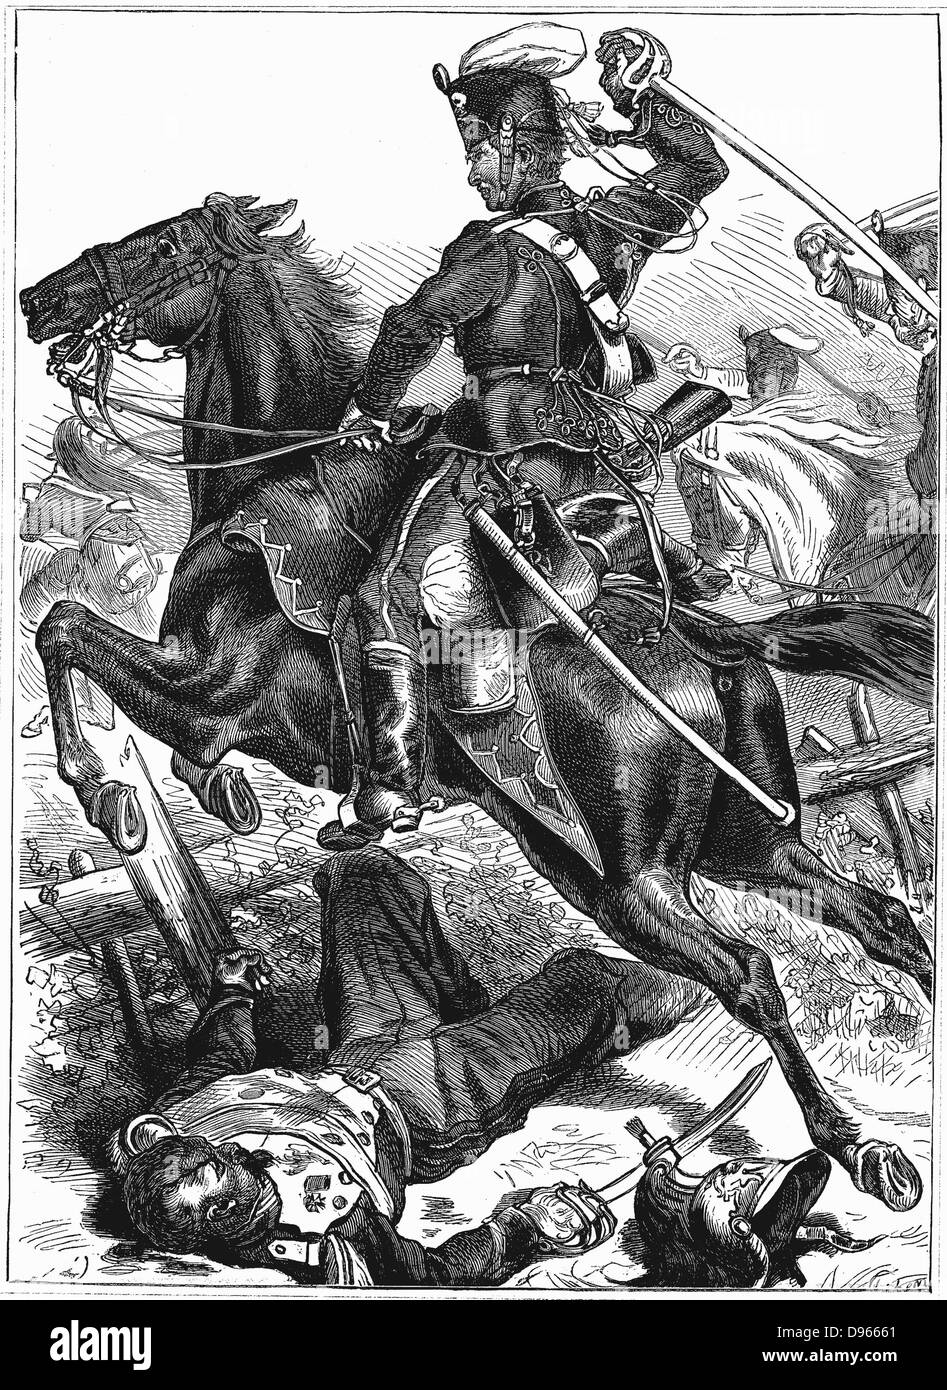 Franco-Prussian War 1870-1871: Prussian Hussar charging with sword drawn. Wood engraving. Stock Photo